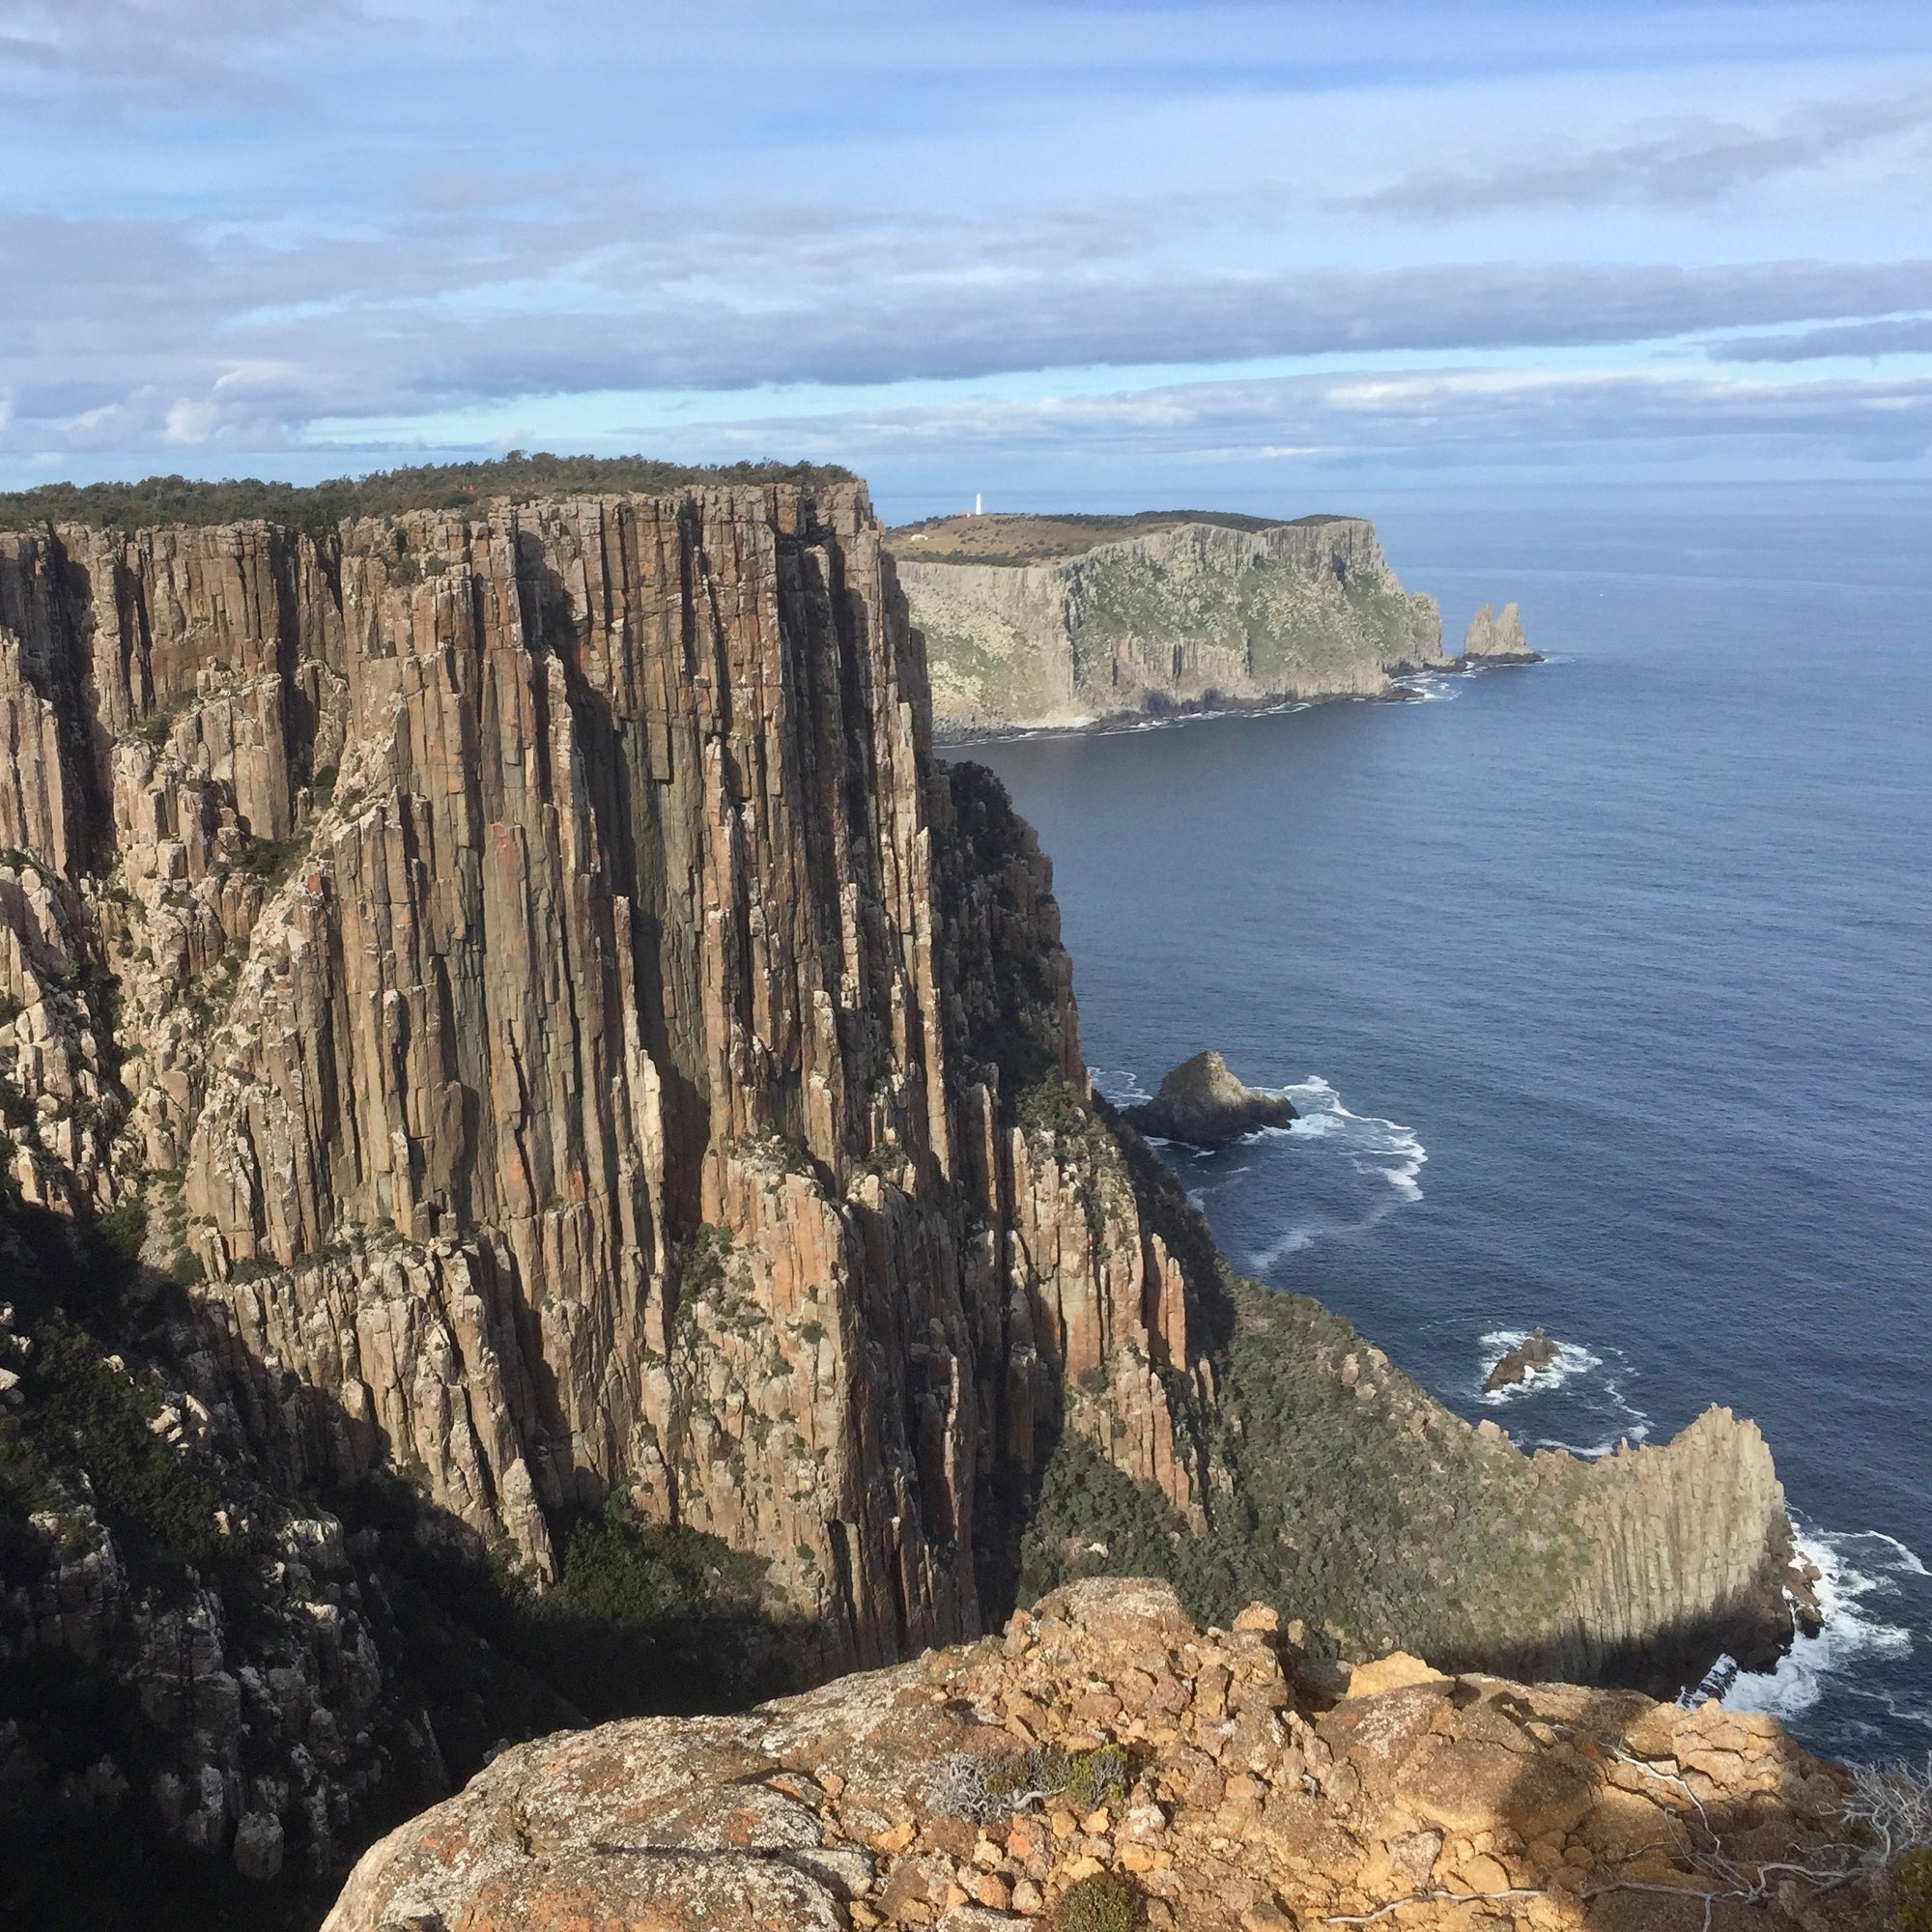 The Three Capes Track is one the most spectacular walks in Tasmania. The Three Capes Track is a 3 day walk in the South East of Tasmania. Walking the Three Capes Track can be done all year round and the crowds are thin in the middle of the year for Winter